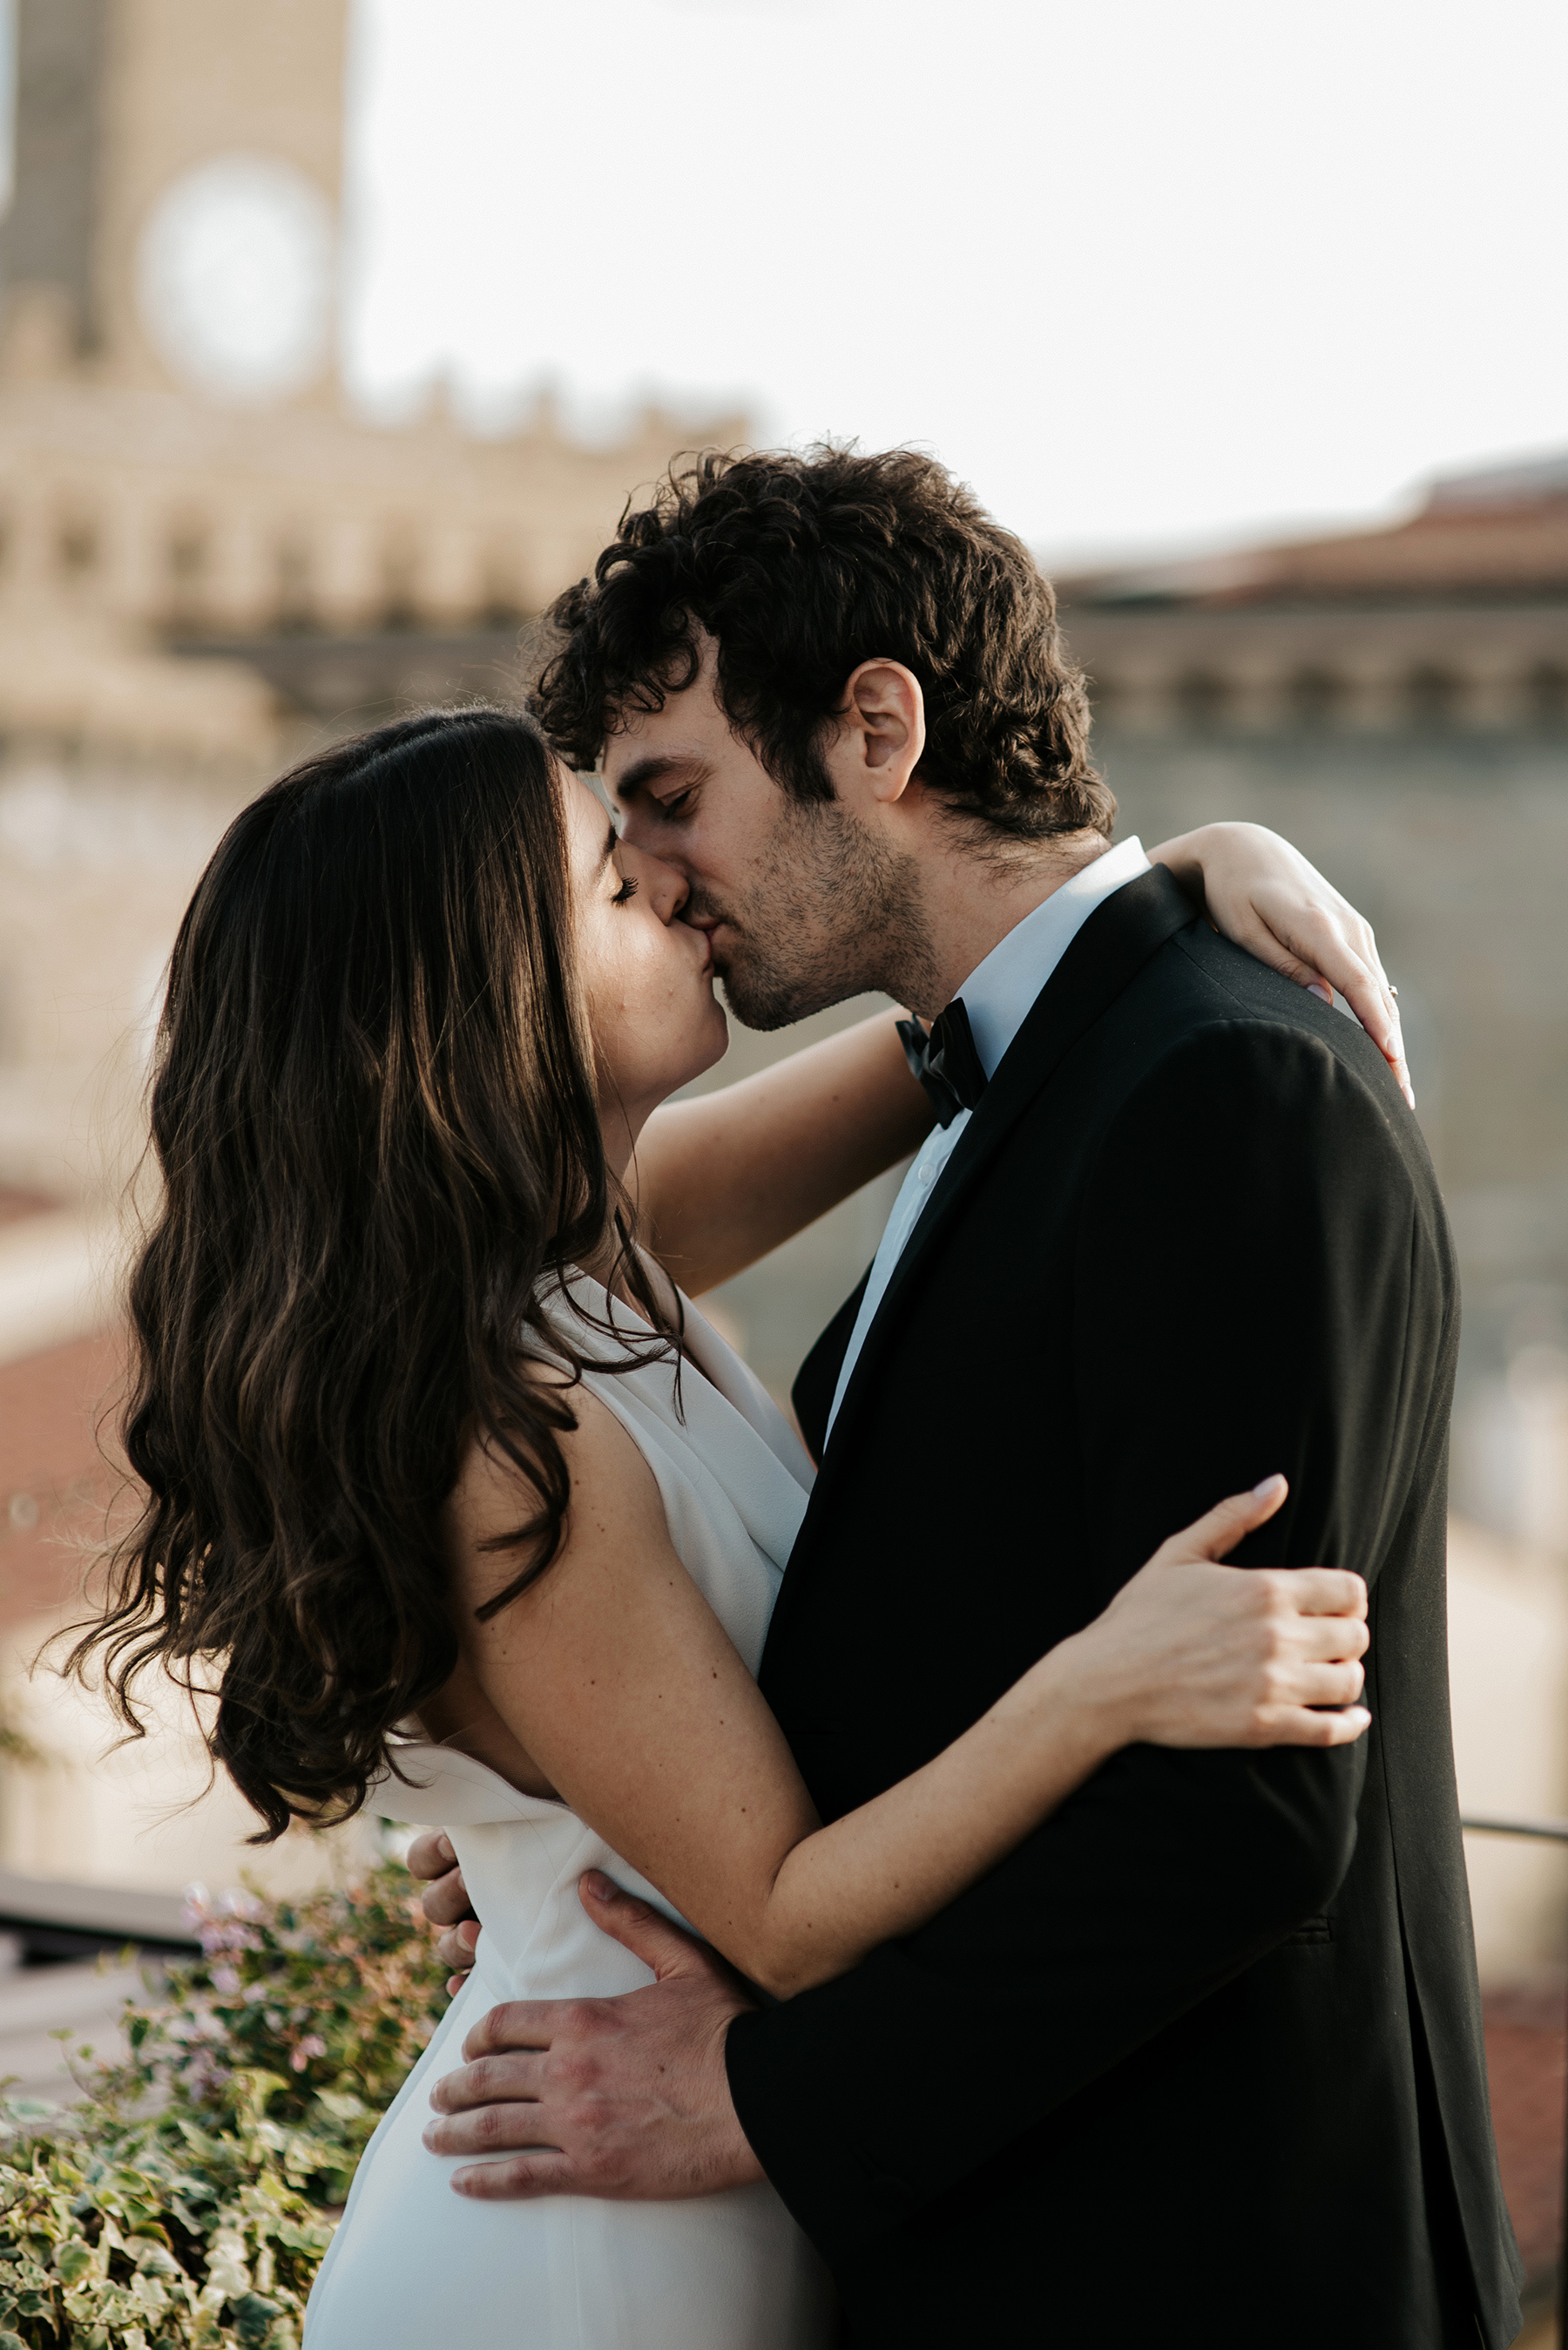 Elegant and Moody Elopement Inspiration in Florence Silvia Mazzei32